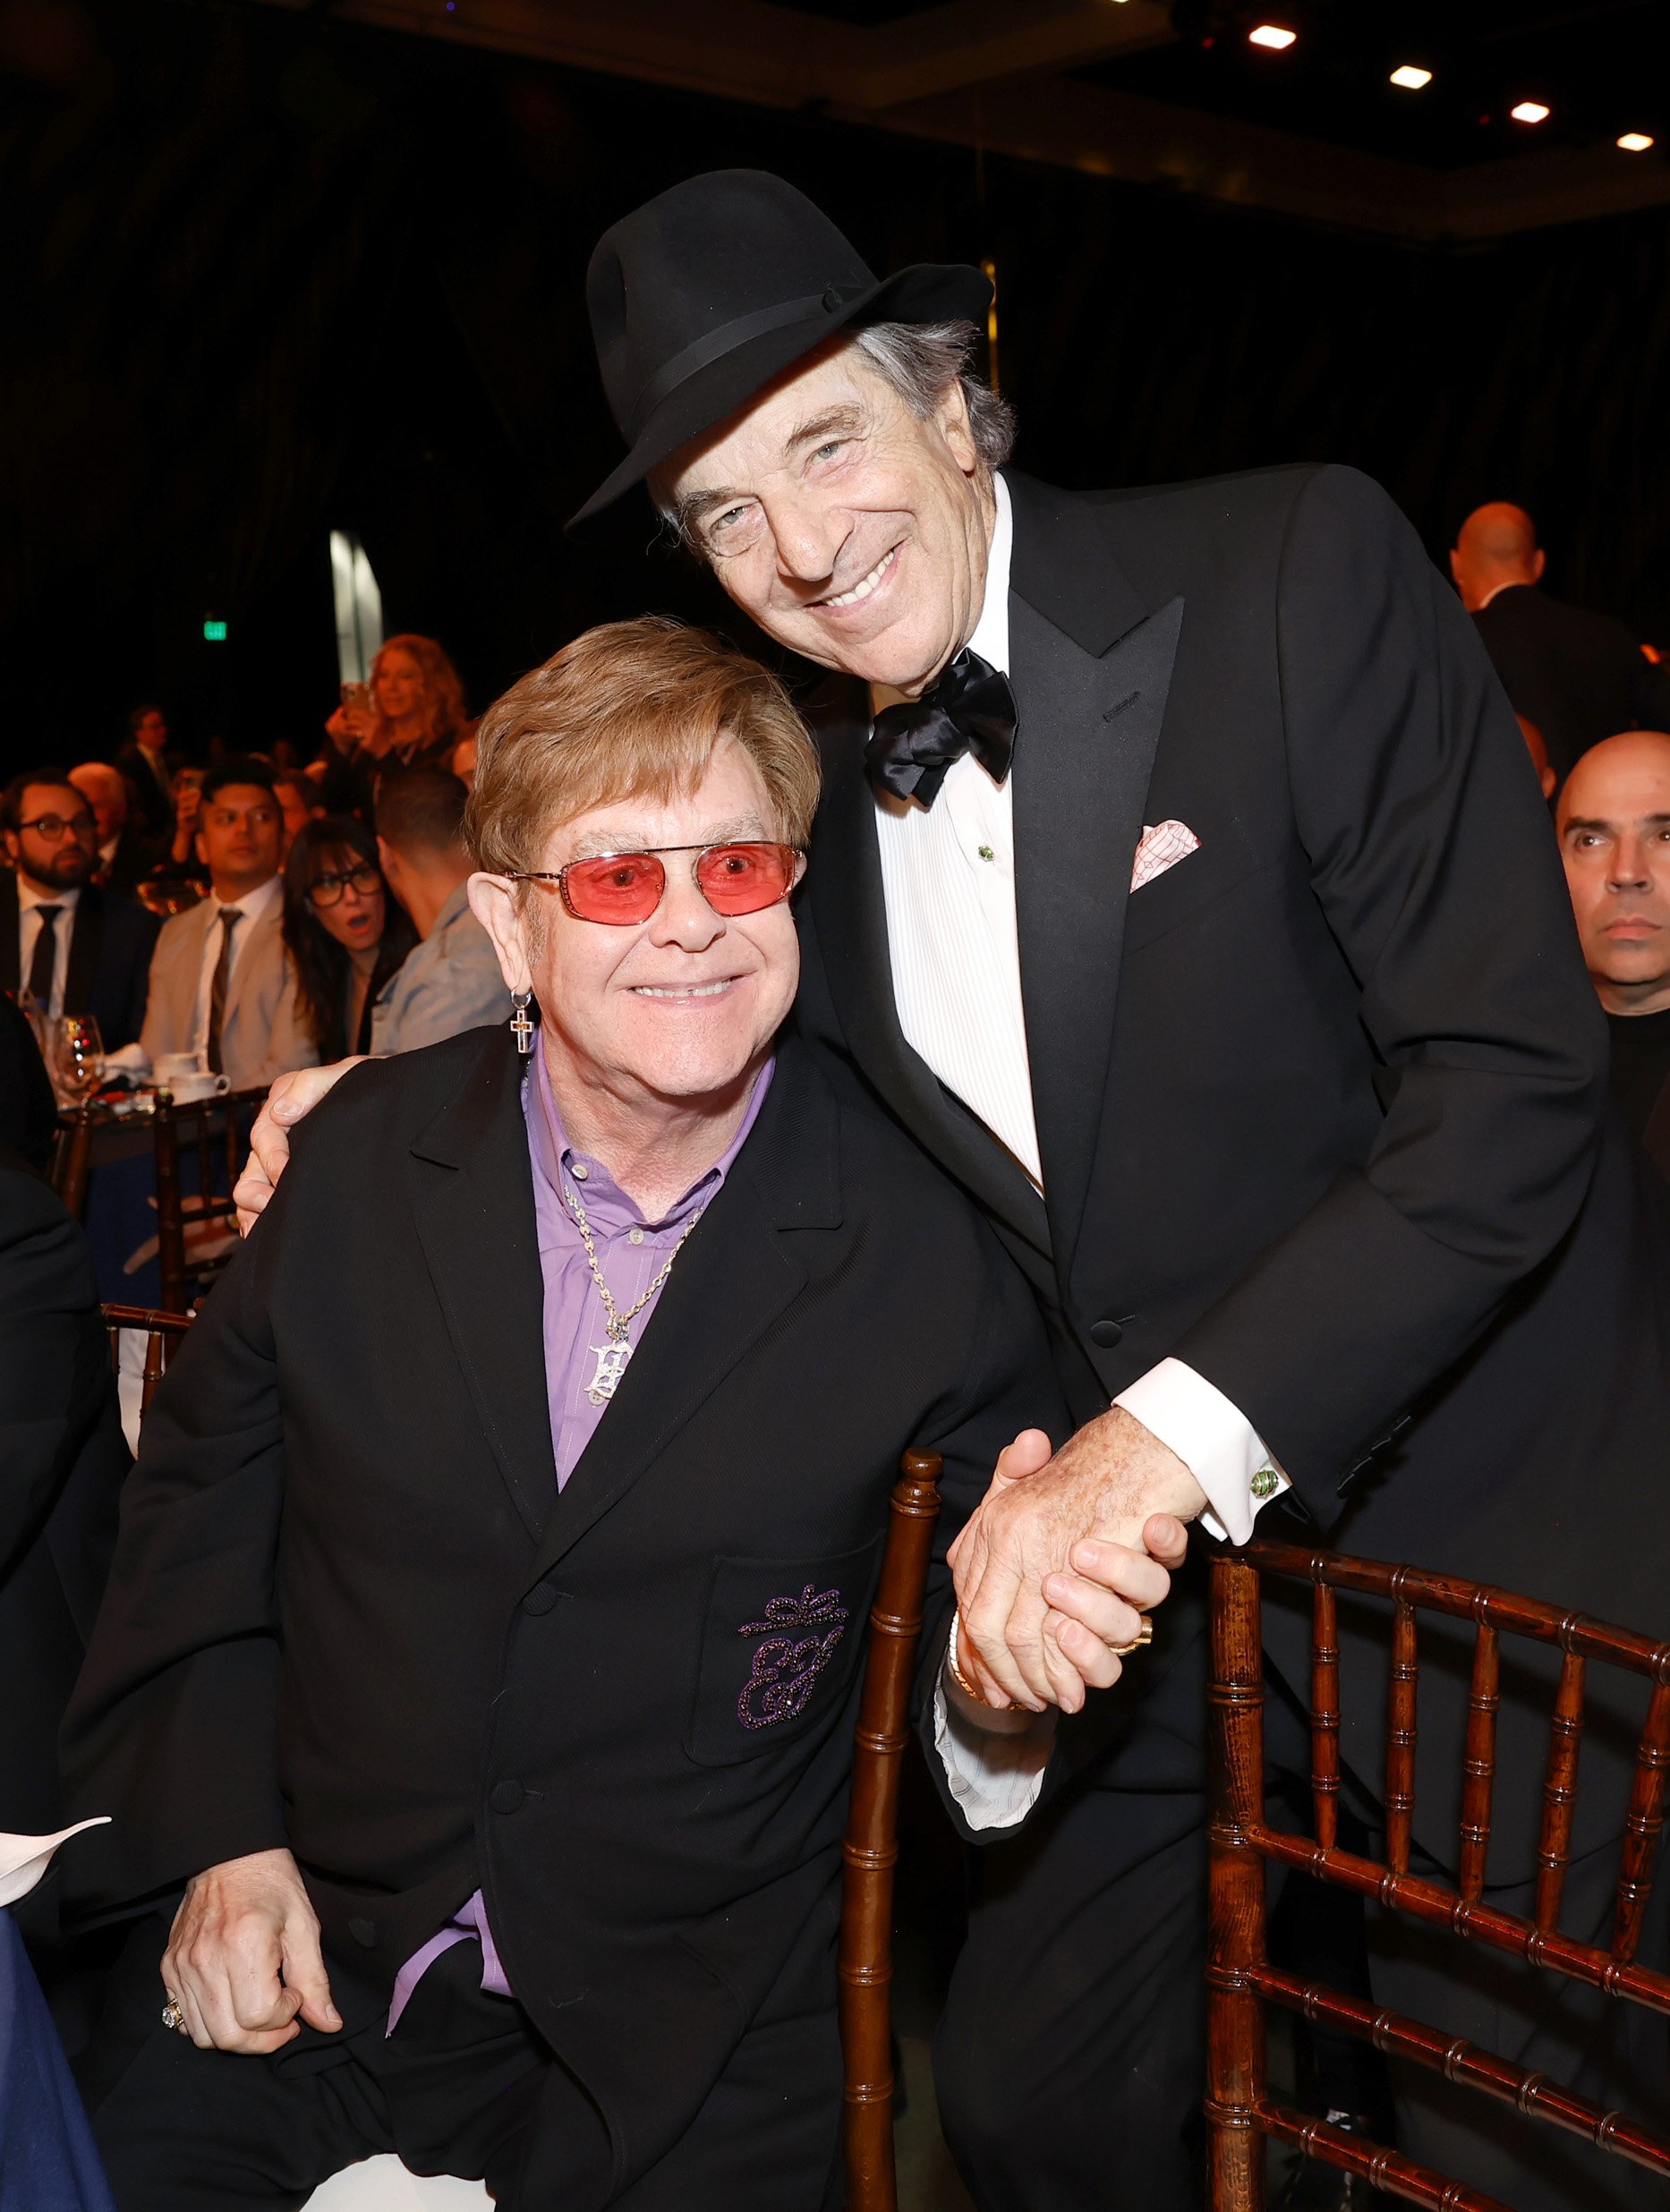  LOS ANGELES, CALIFORNIA - FEBRUARY 03: (L-R) Elton John and Paul Pelosi attend MusiCares Persons of the Year Honoring Berry Gordy and Smokey Robinson at Los Angeles Convention Center on February 03, 2023 in Los Angeles, California. (Photo by Emma Mc